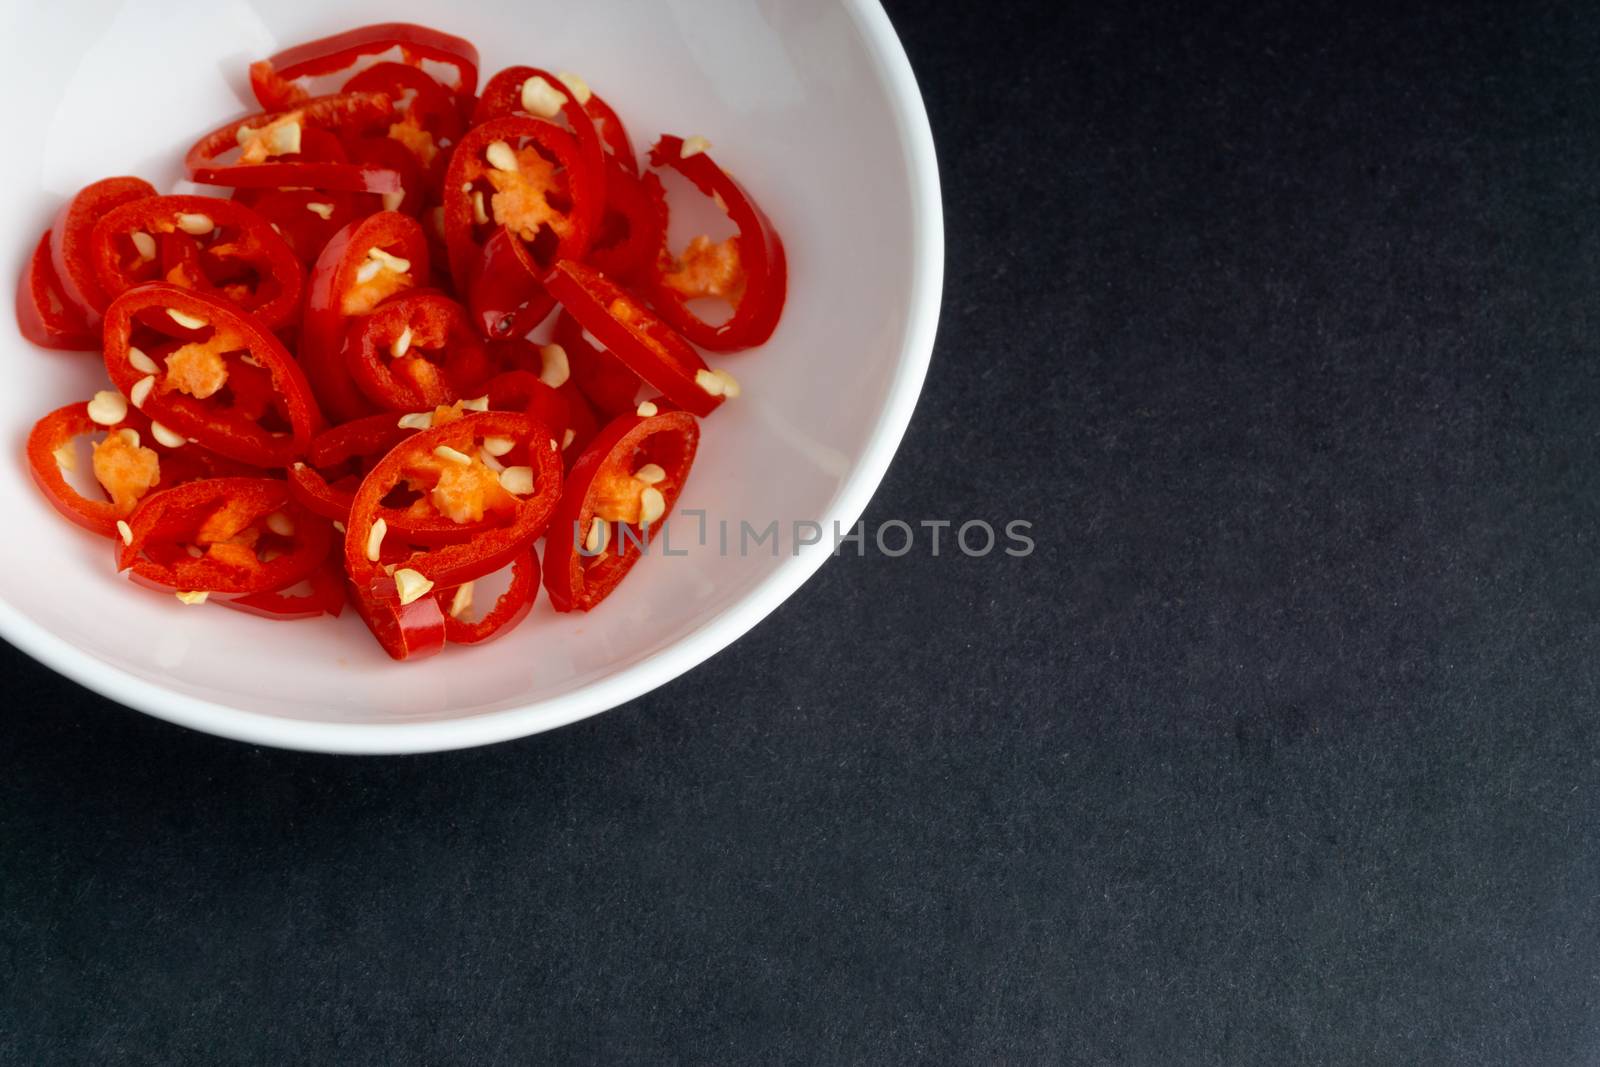 Spicy slice of red chillies closeup on black background by silverwings